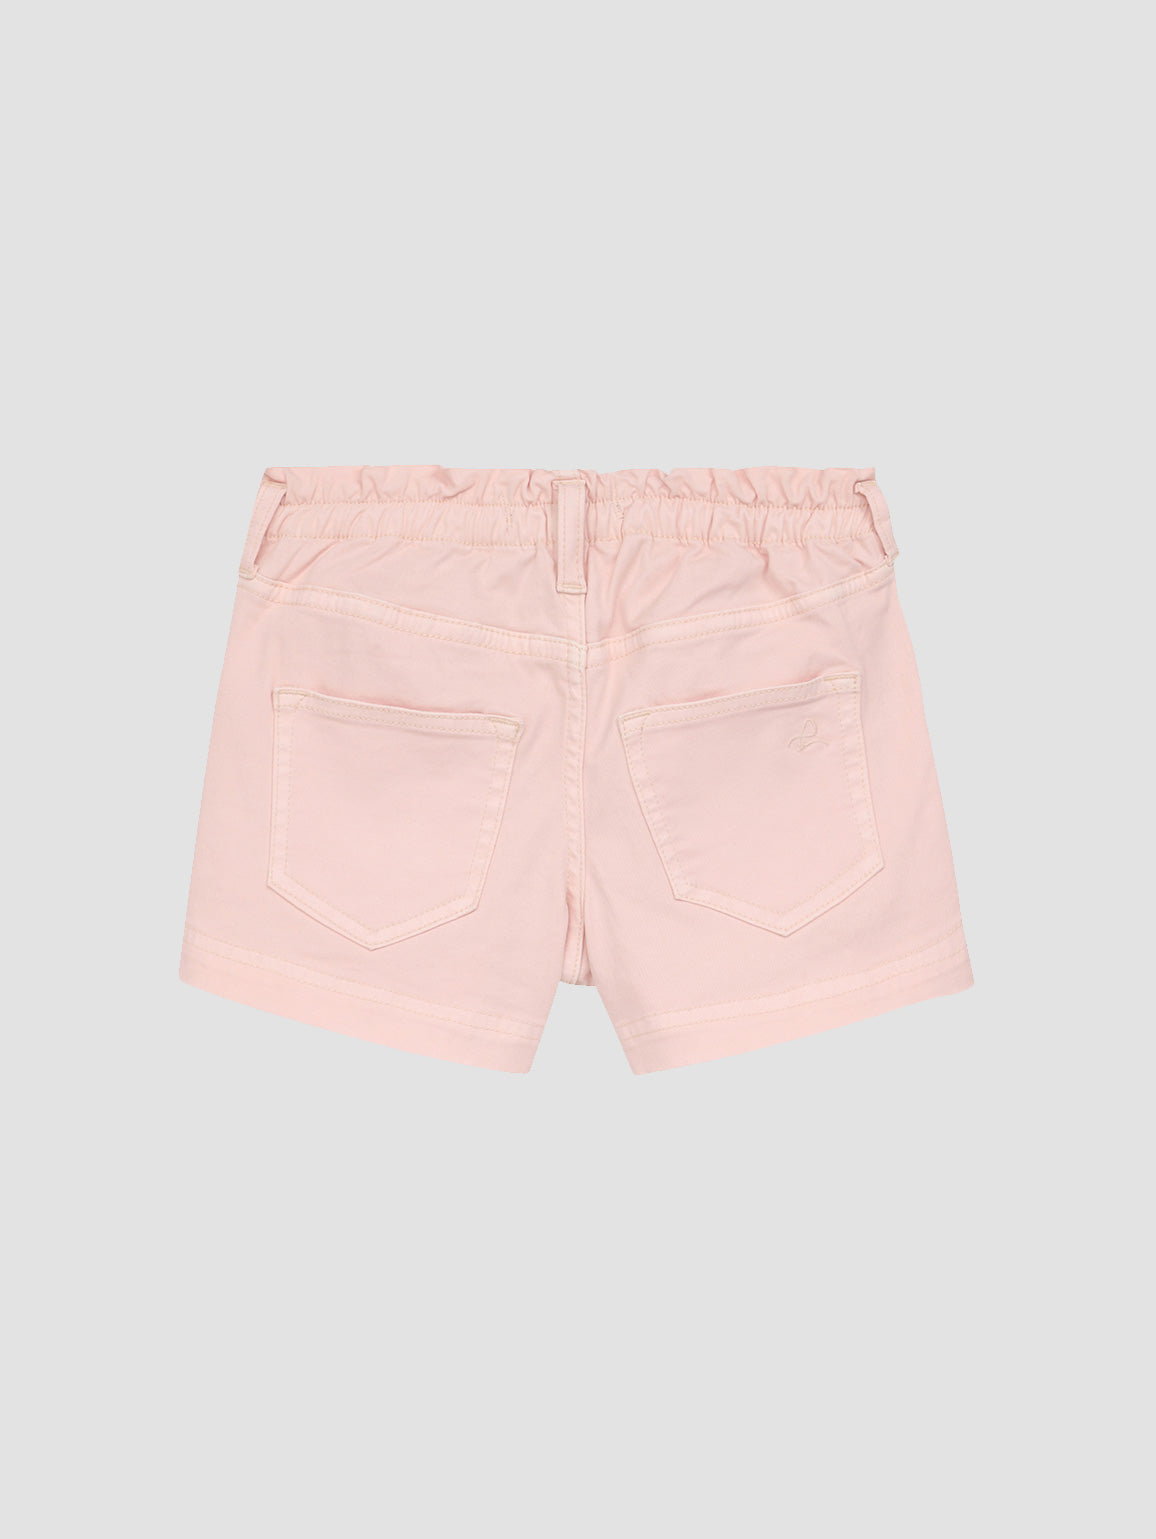 Lucy Short | Pink Peony